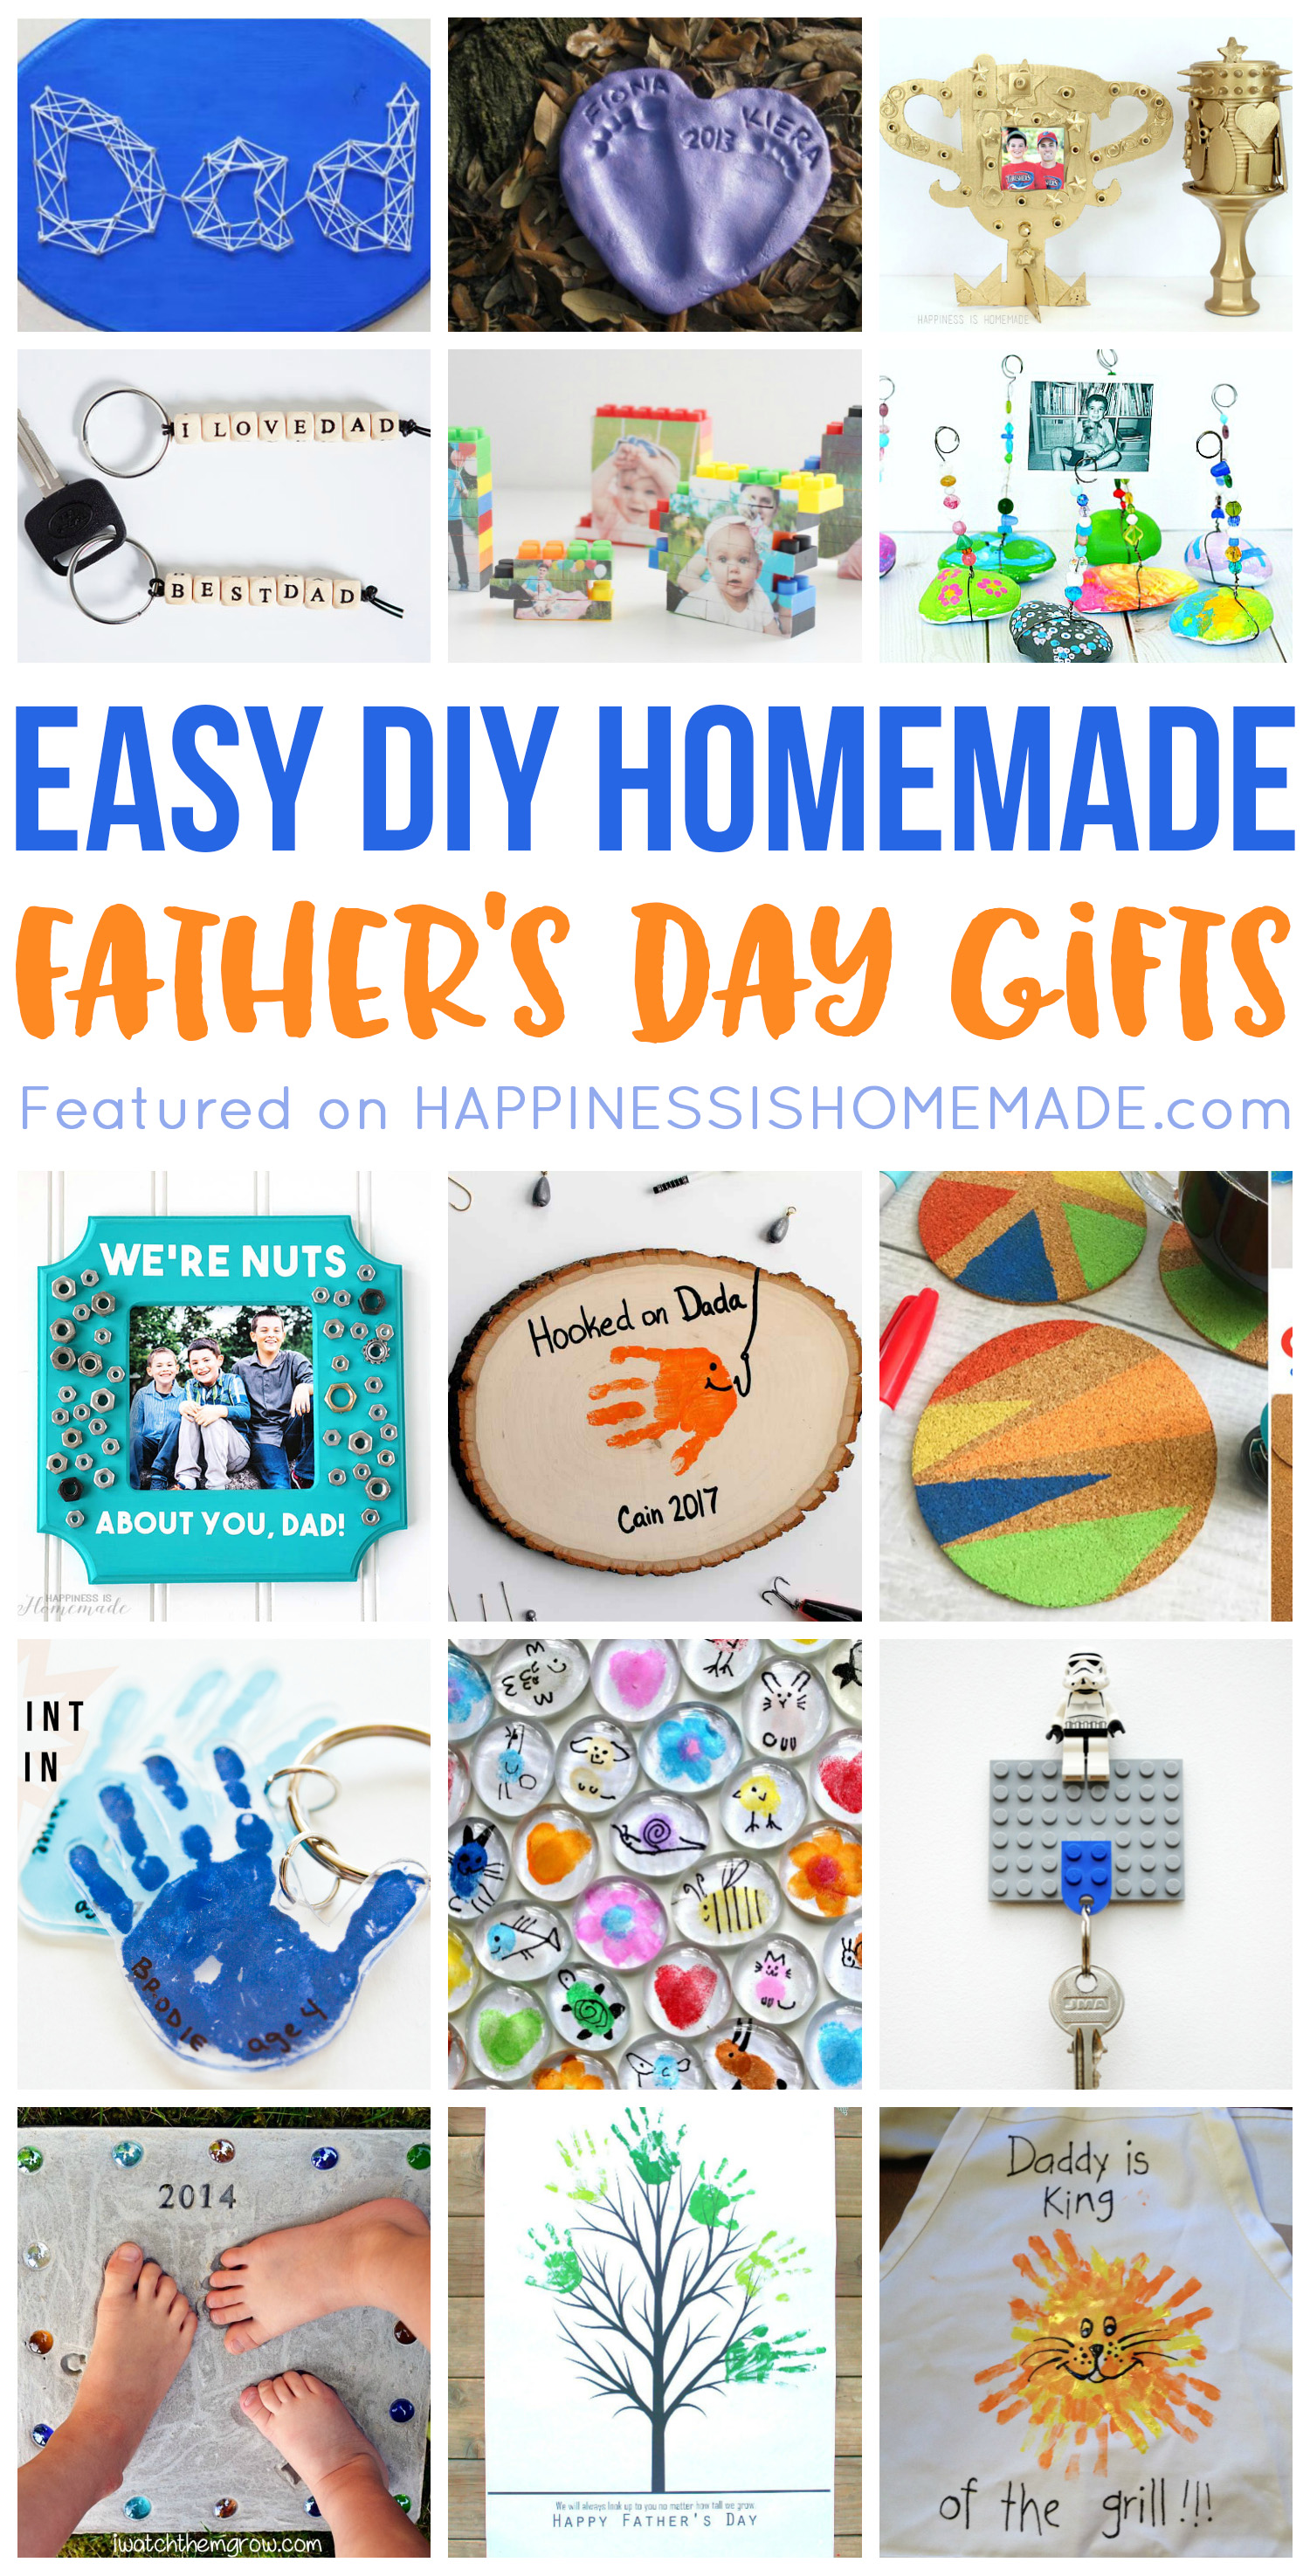 Simple Father's Day Crafts from Kids - Boogie Wipes